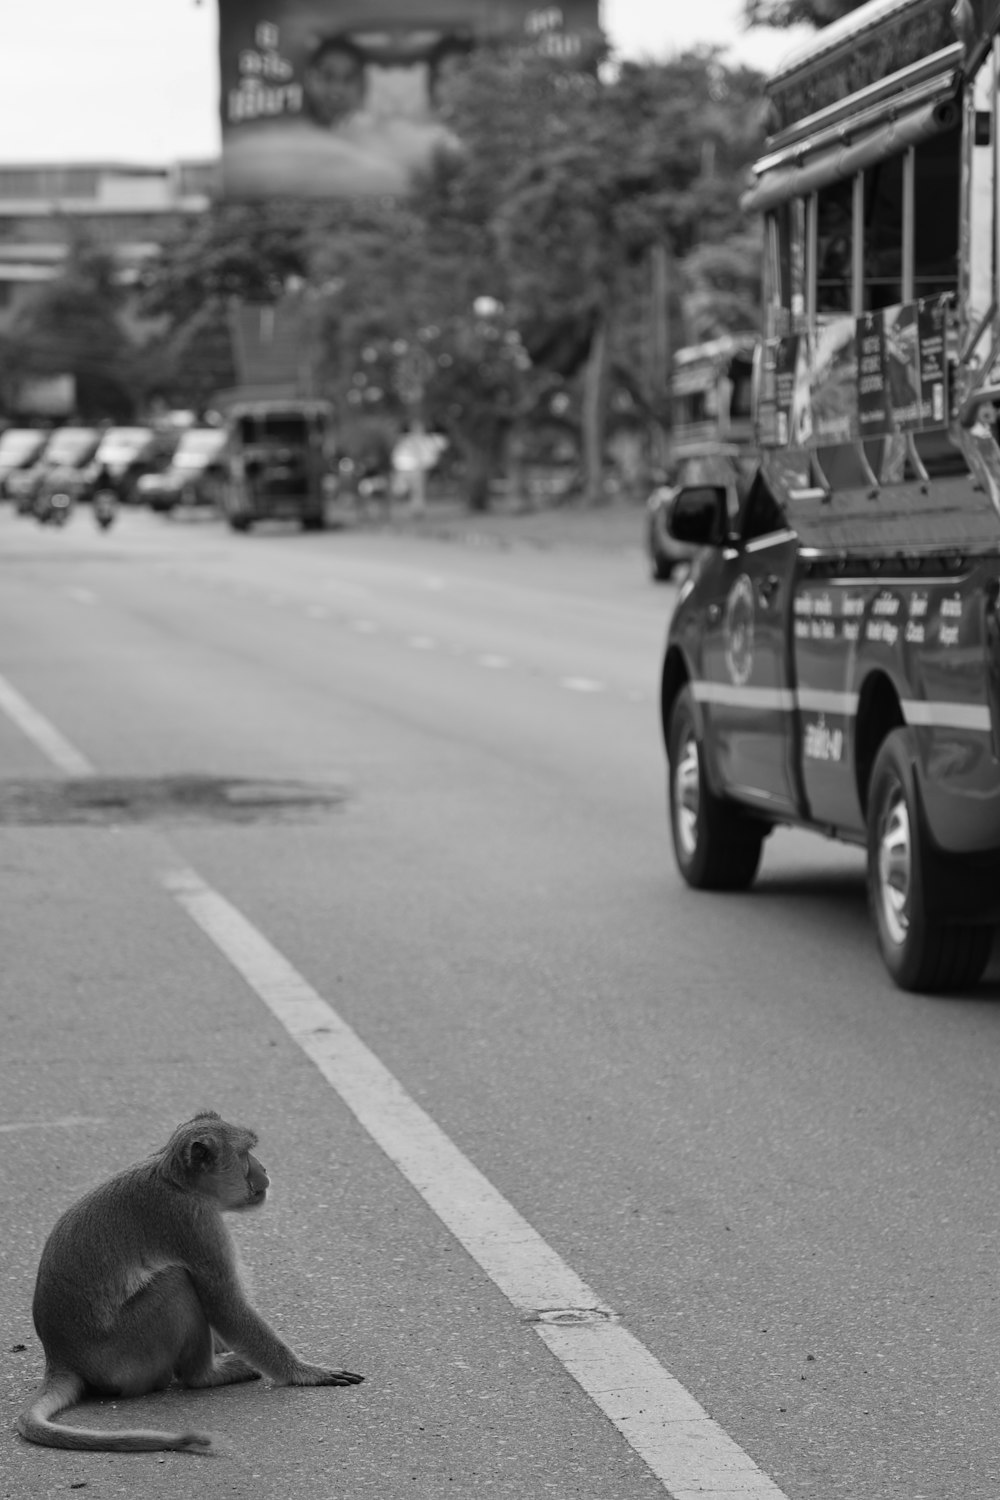 a monkey sitting on the side of a road next to a bus